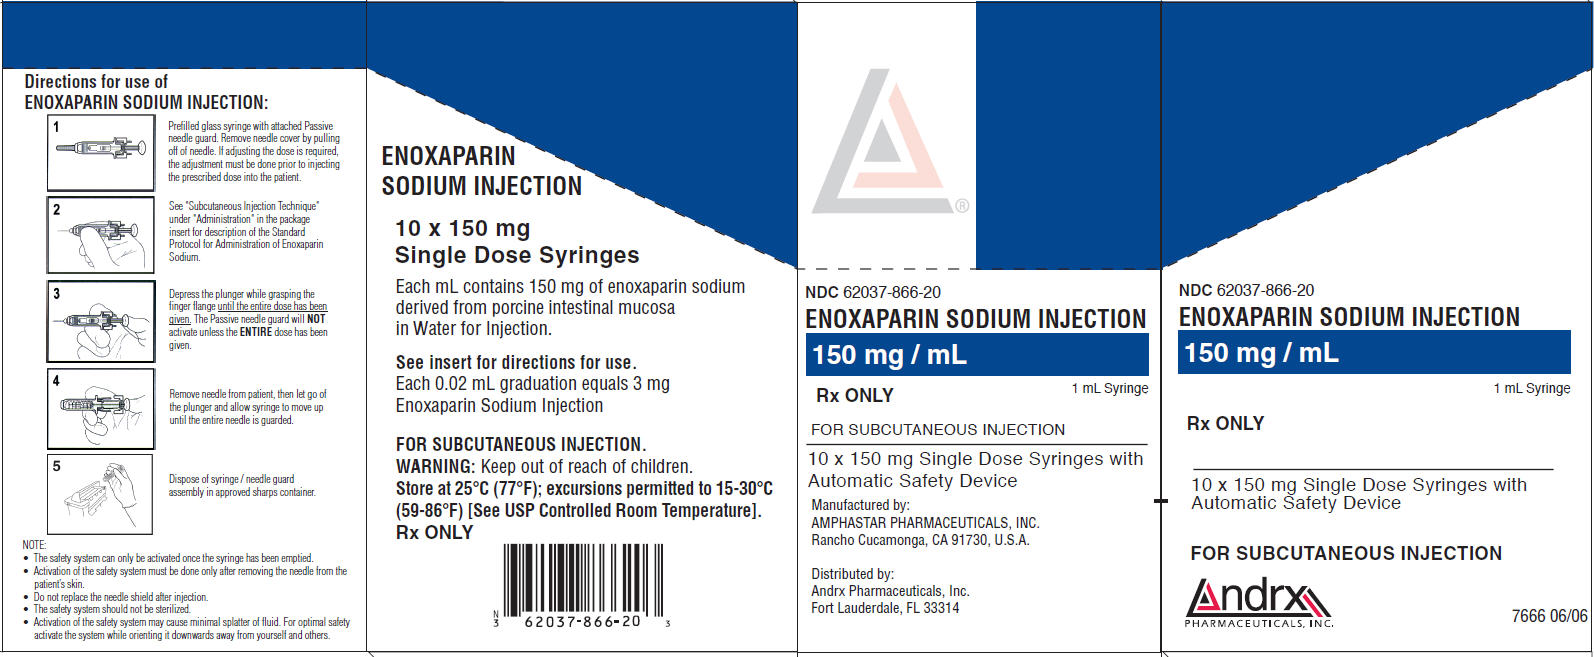 NDC 62037-866-20 ENOXAPARIN SODIUM INJECTION 150 mg/ mL Rx ONLY 1 mL Syringe FOR SUBCUTANEOUS INJECTION 10 x 150 mg Single Dose Syringes with Automatic Safety Device